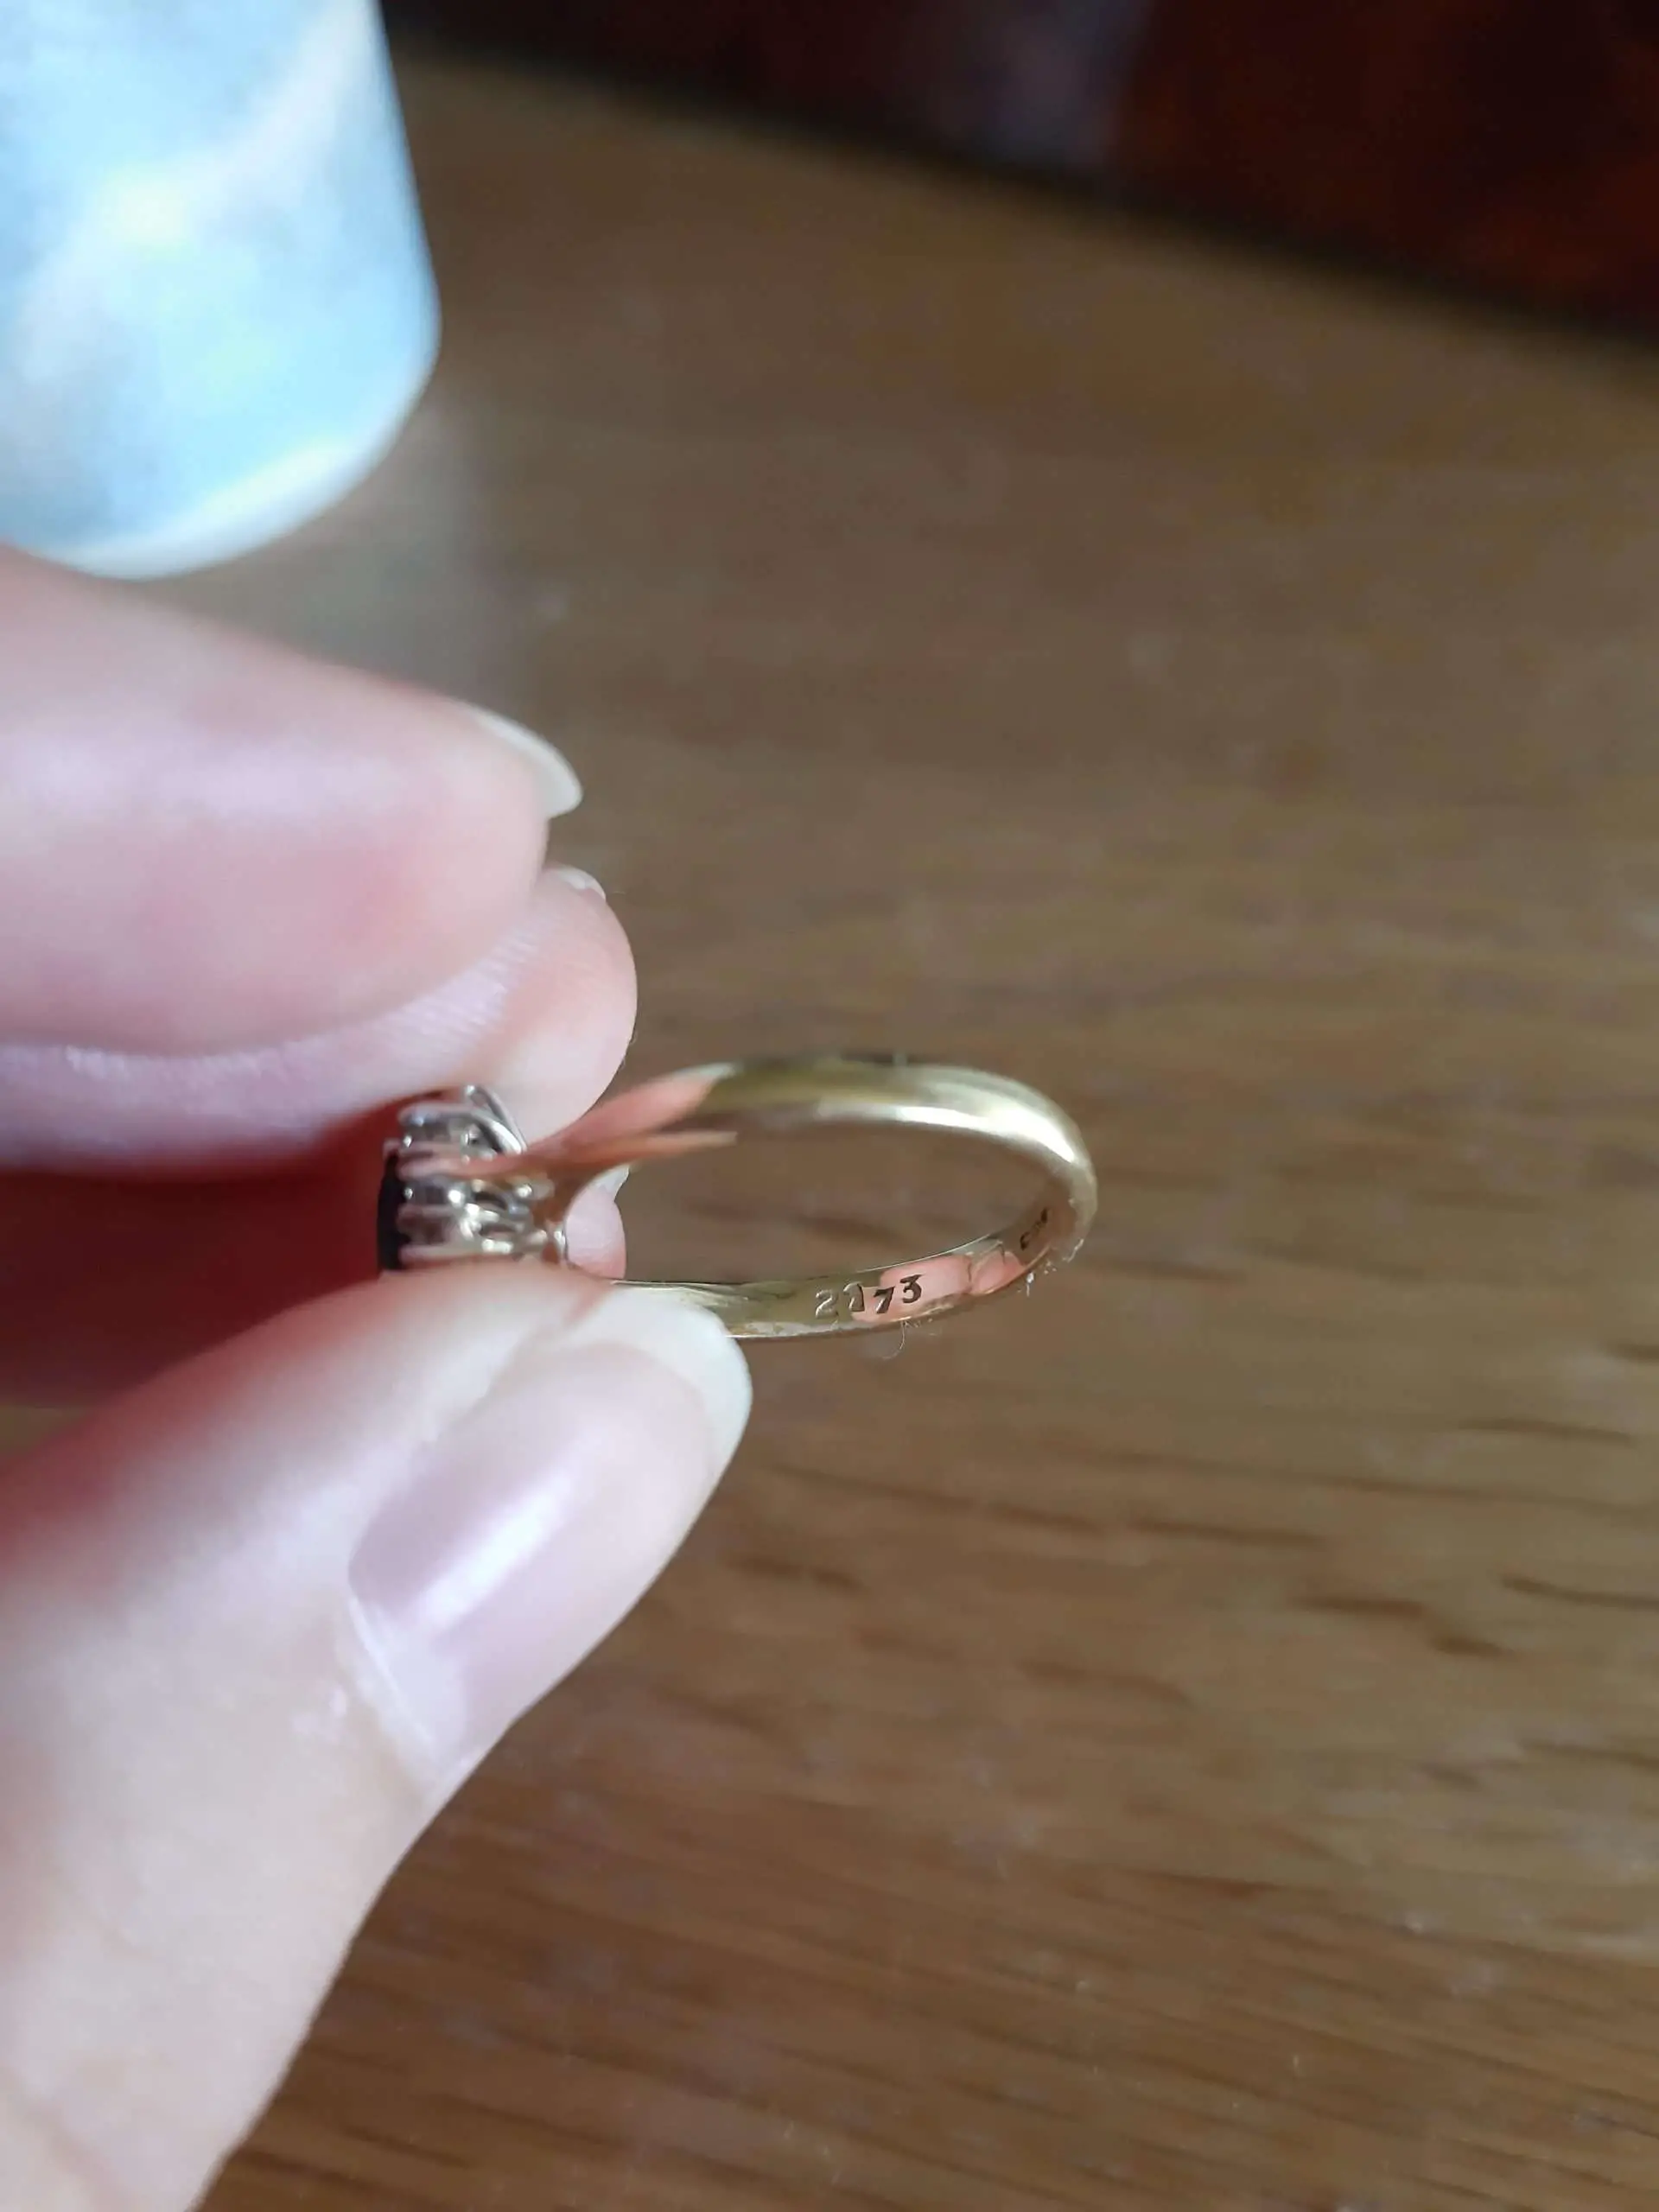 What does the number on this ring mean